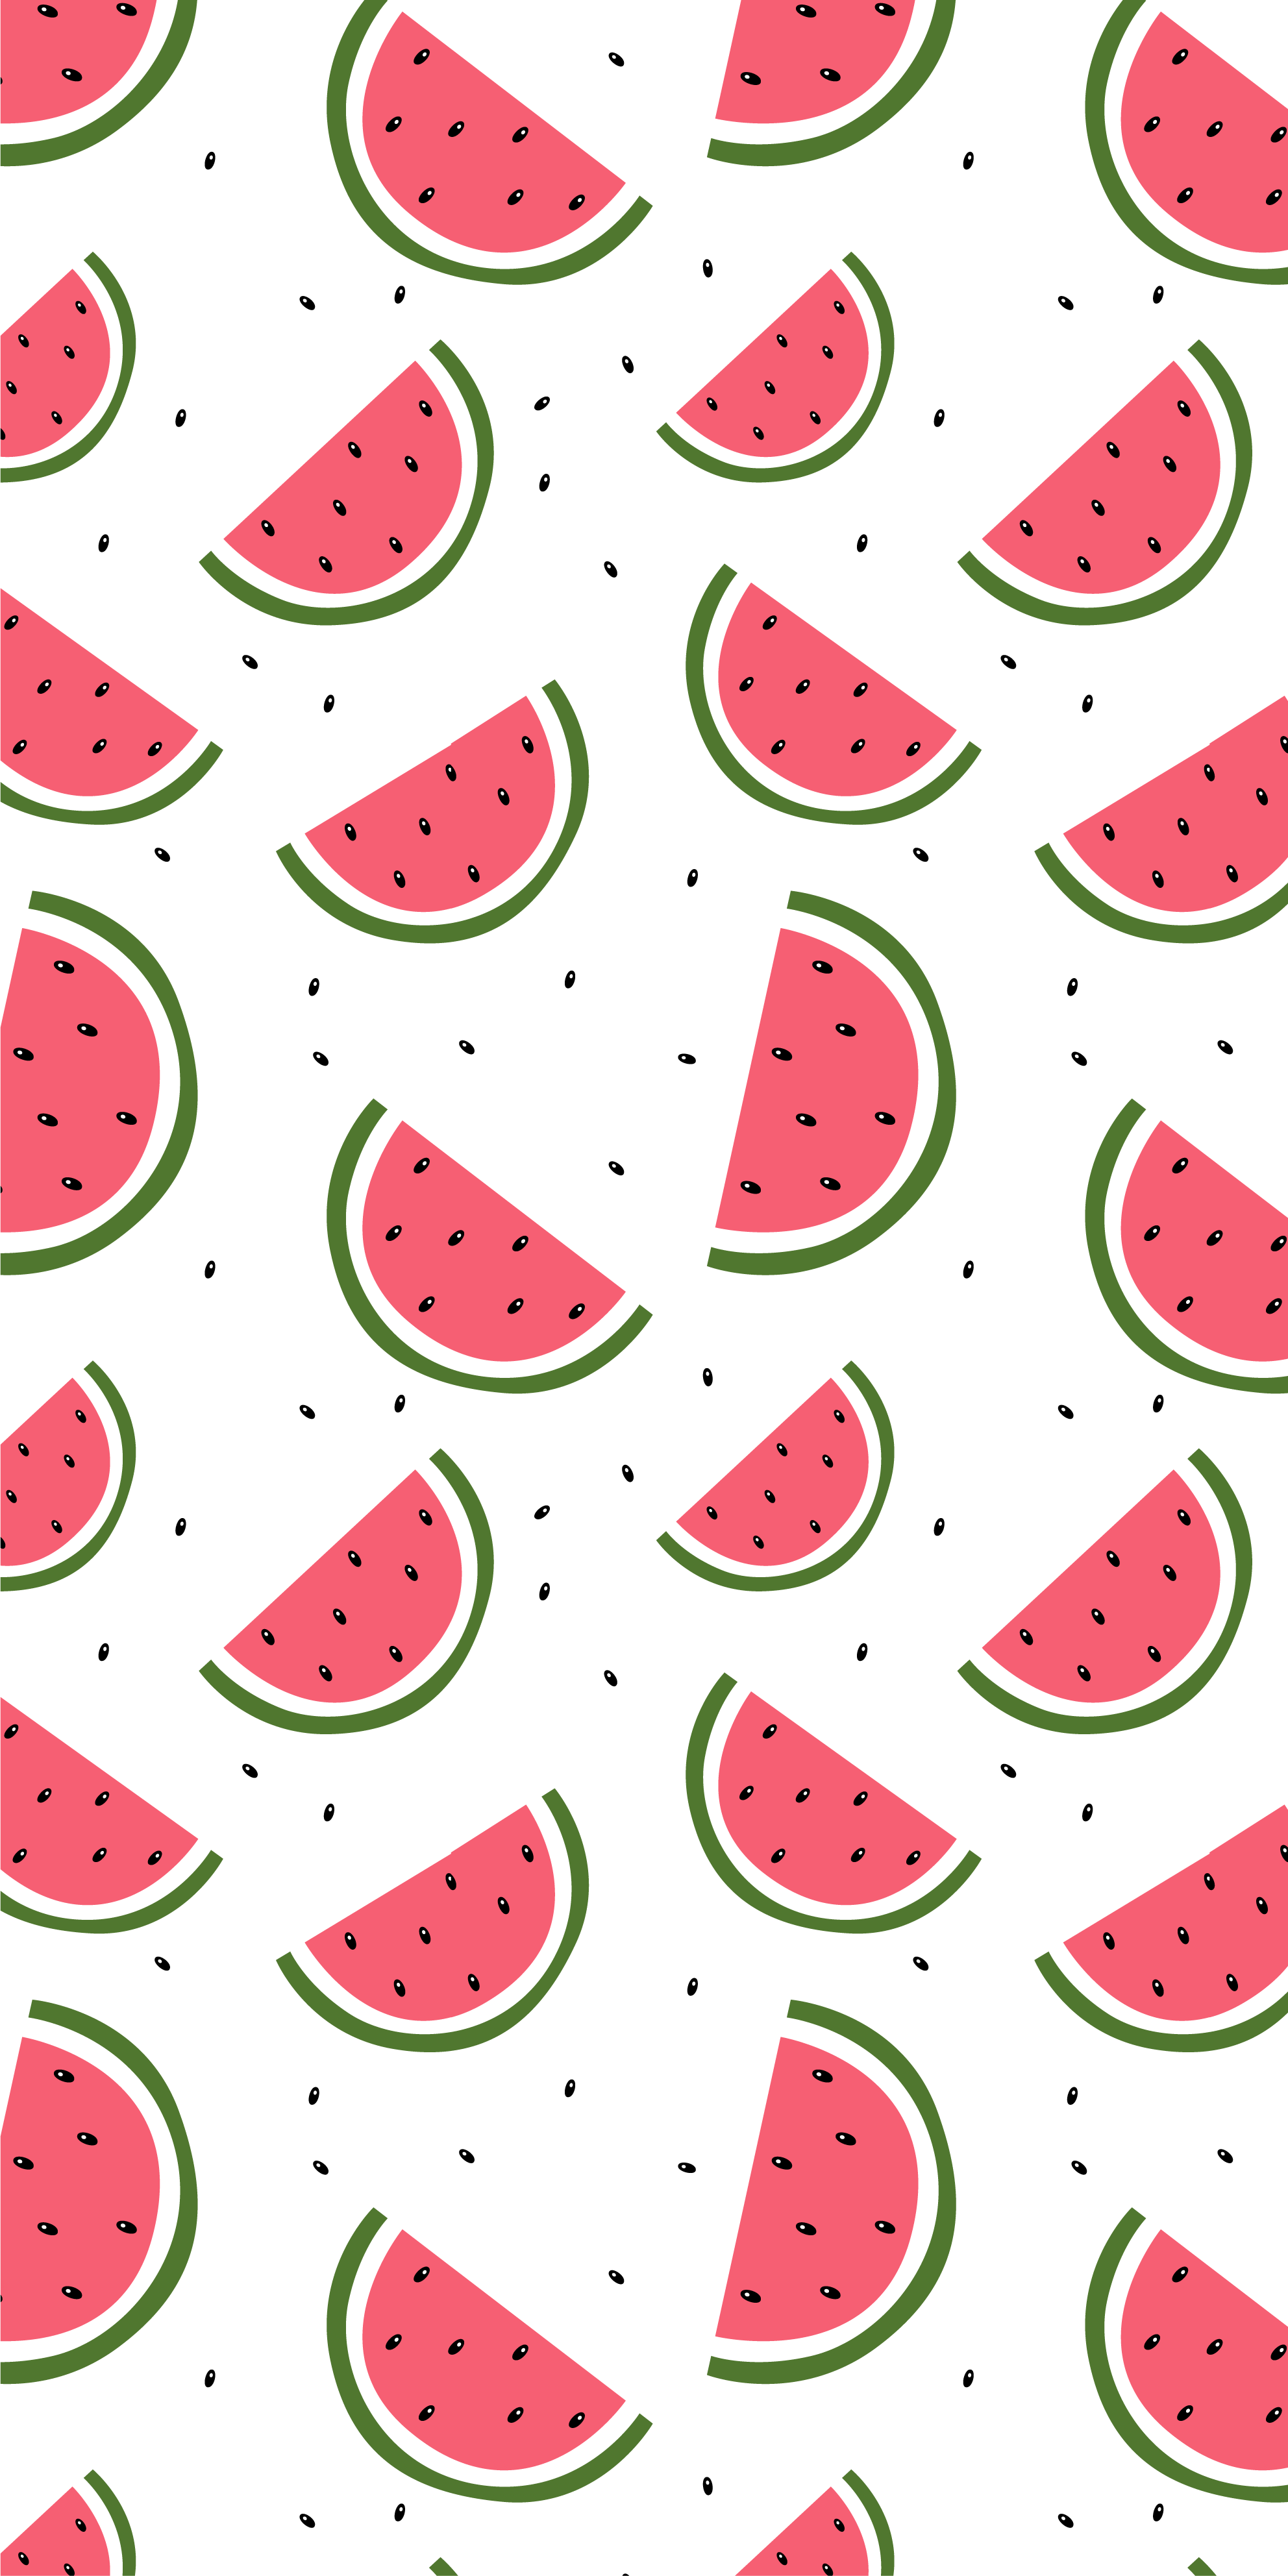 A pattern of watermelon slices on a white background - Watermelon